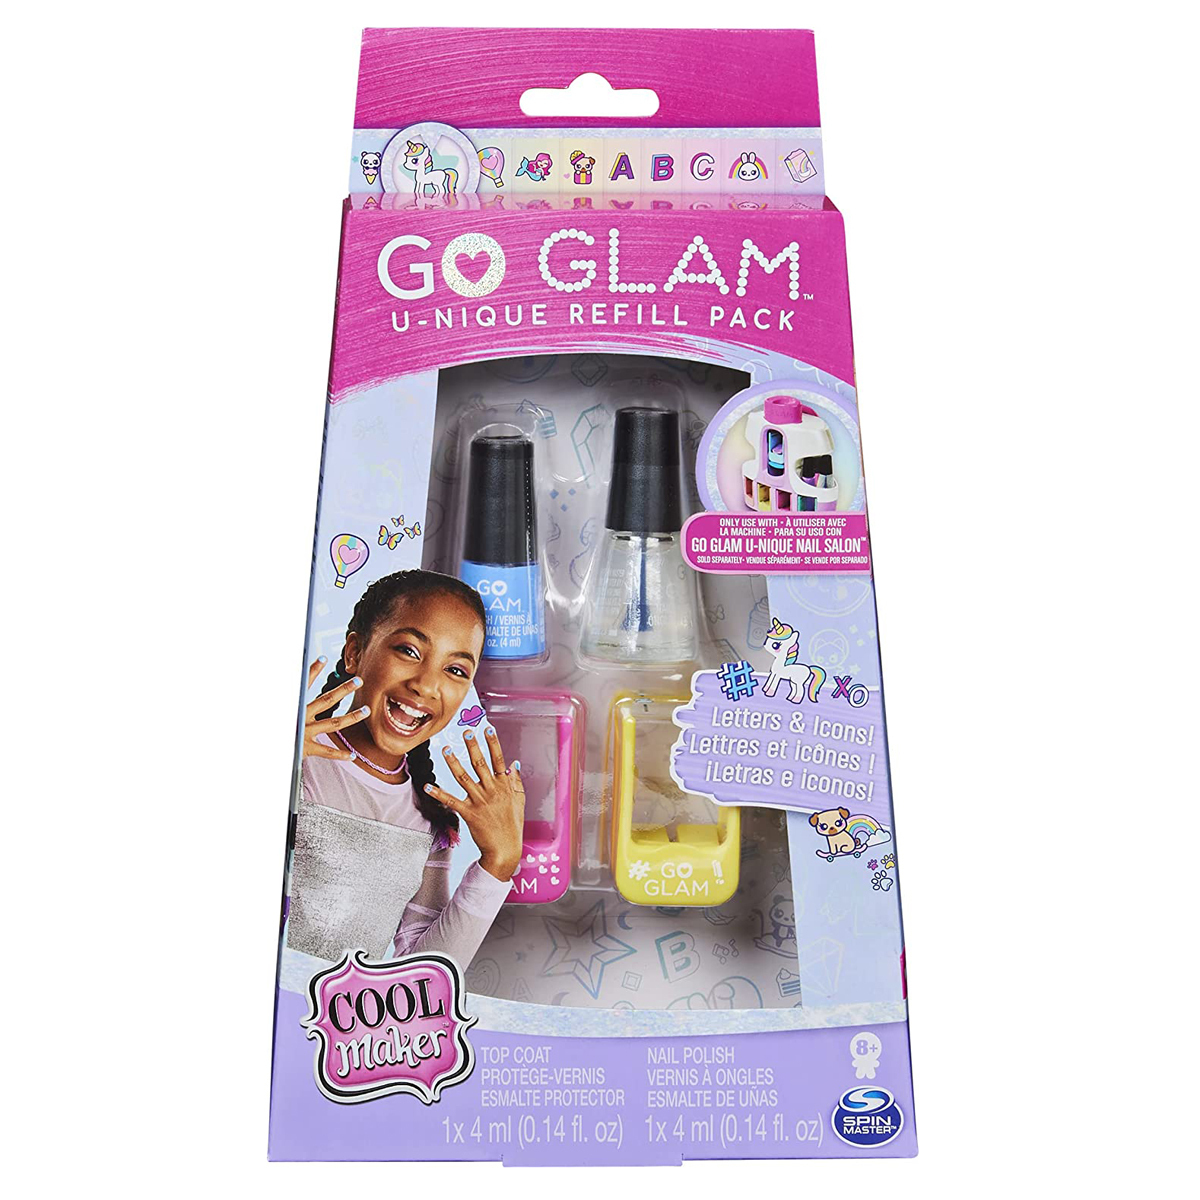 A Quick and Complete Guide to Airbrush Nails – Glam Goodies